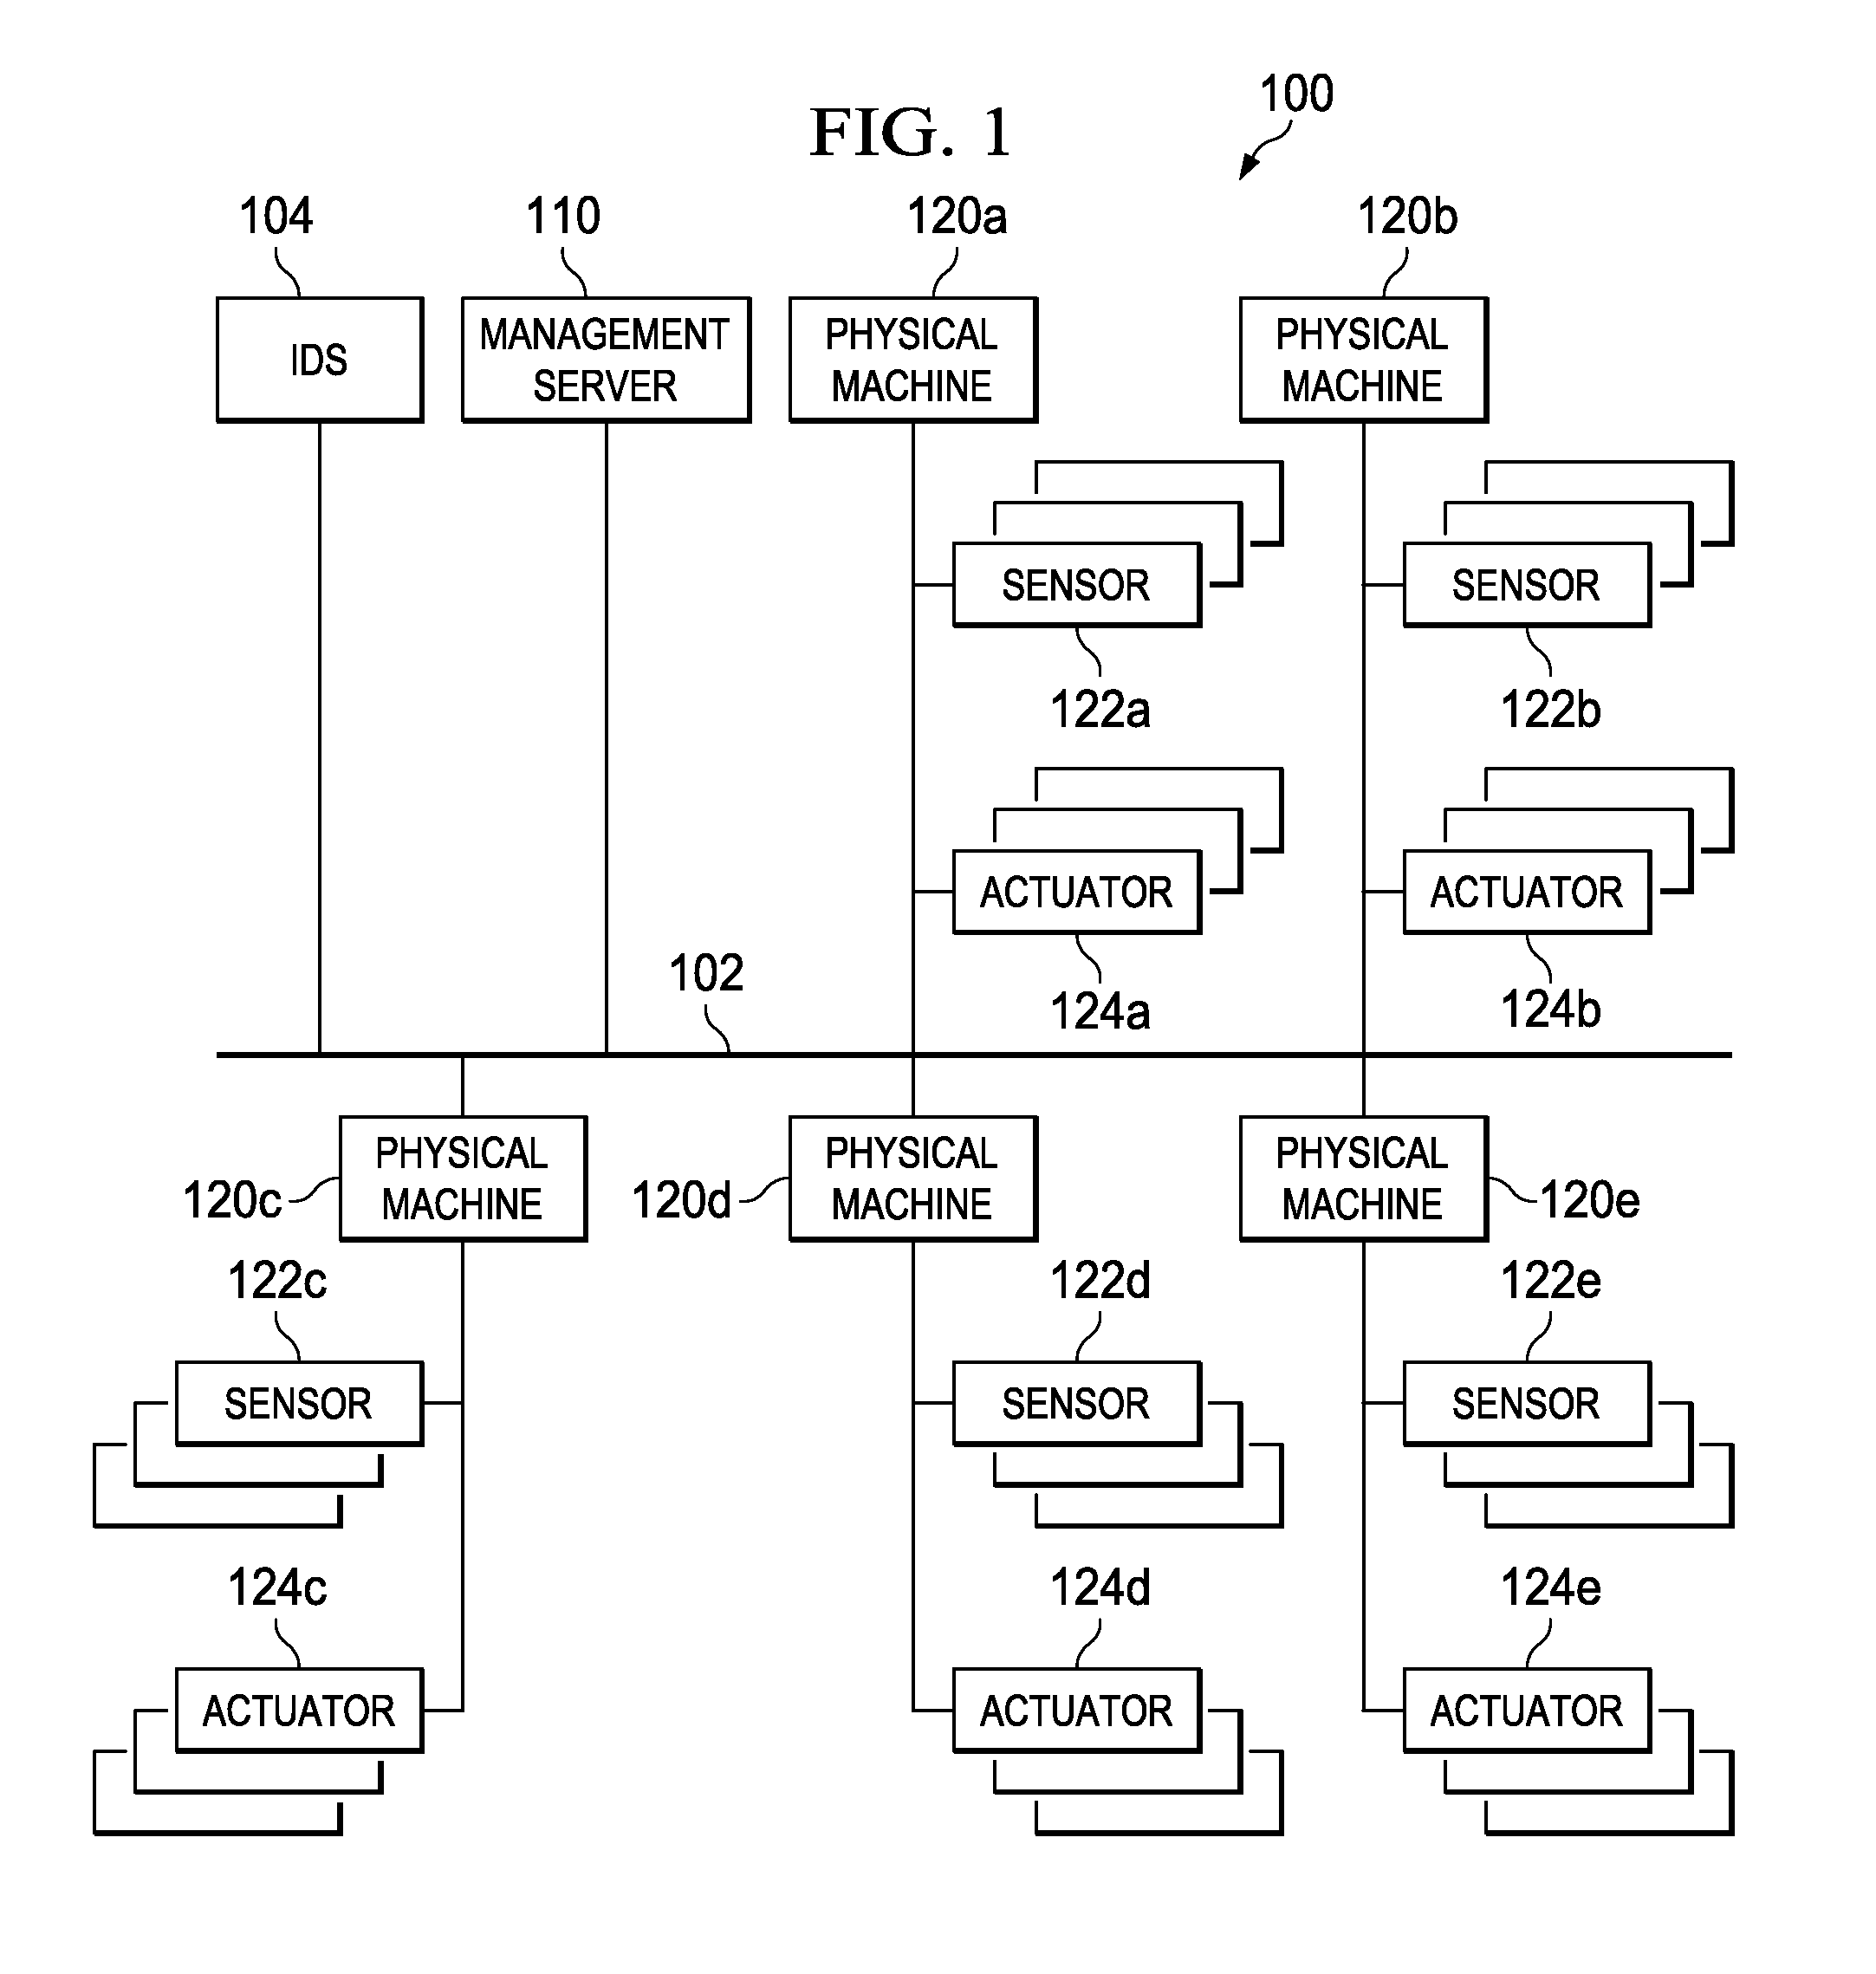 Abnormality Detection for Isolating a Control System